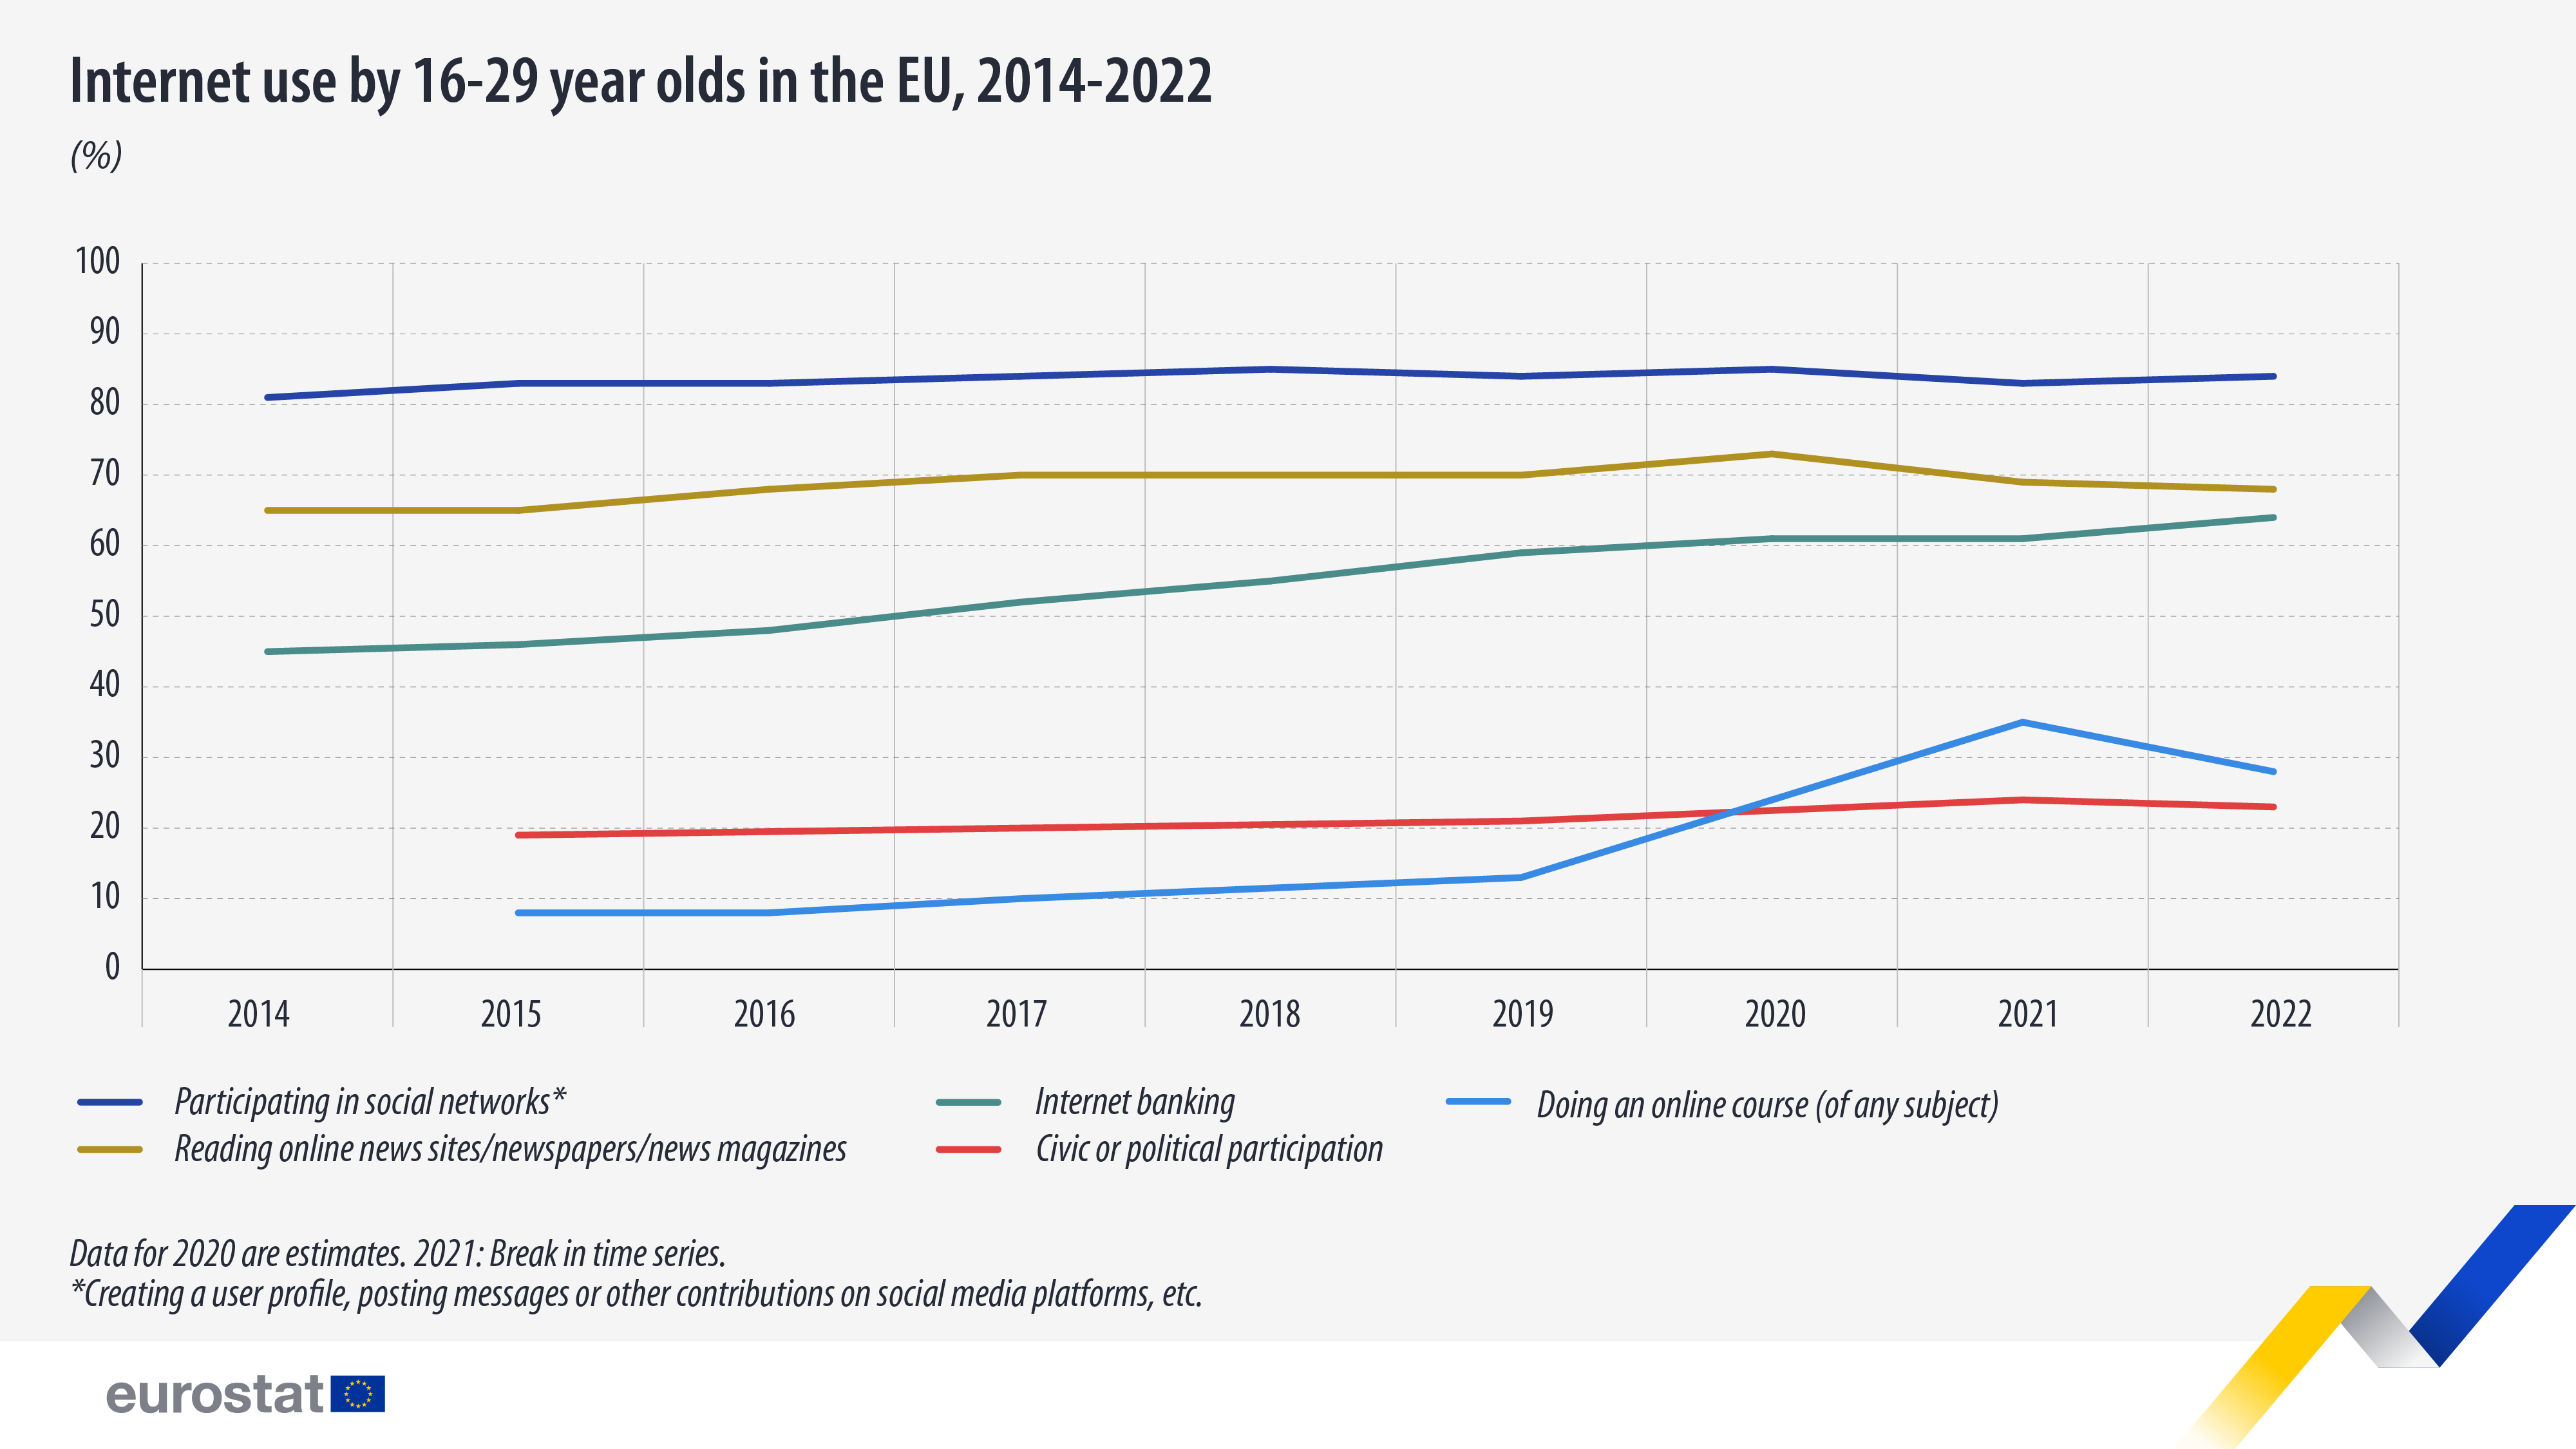 timeline graph: internet use by 16-29 year olds in the EU, 2014-2022, in %, participation in social networks in blue, internet banking in teal, doing an online course in blue, reading online news in gold yellow and civic or political participation in red.